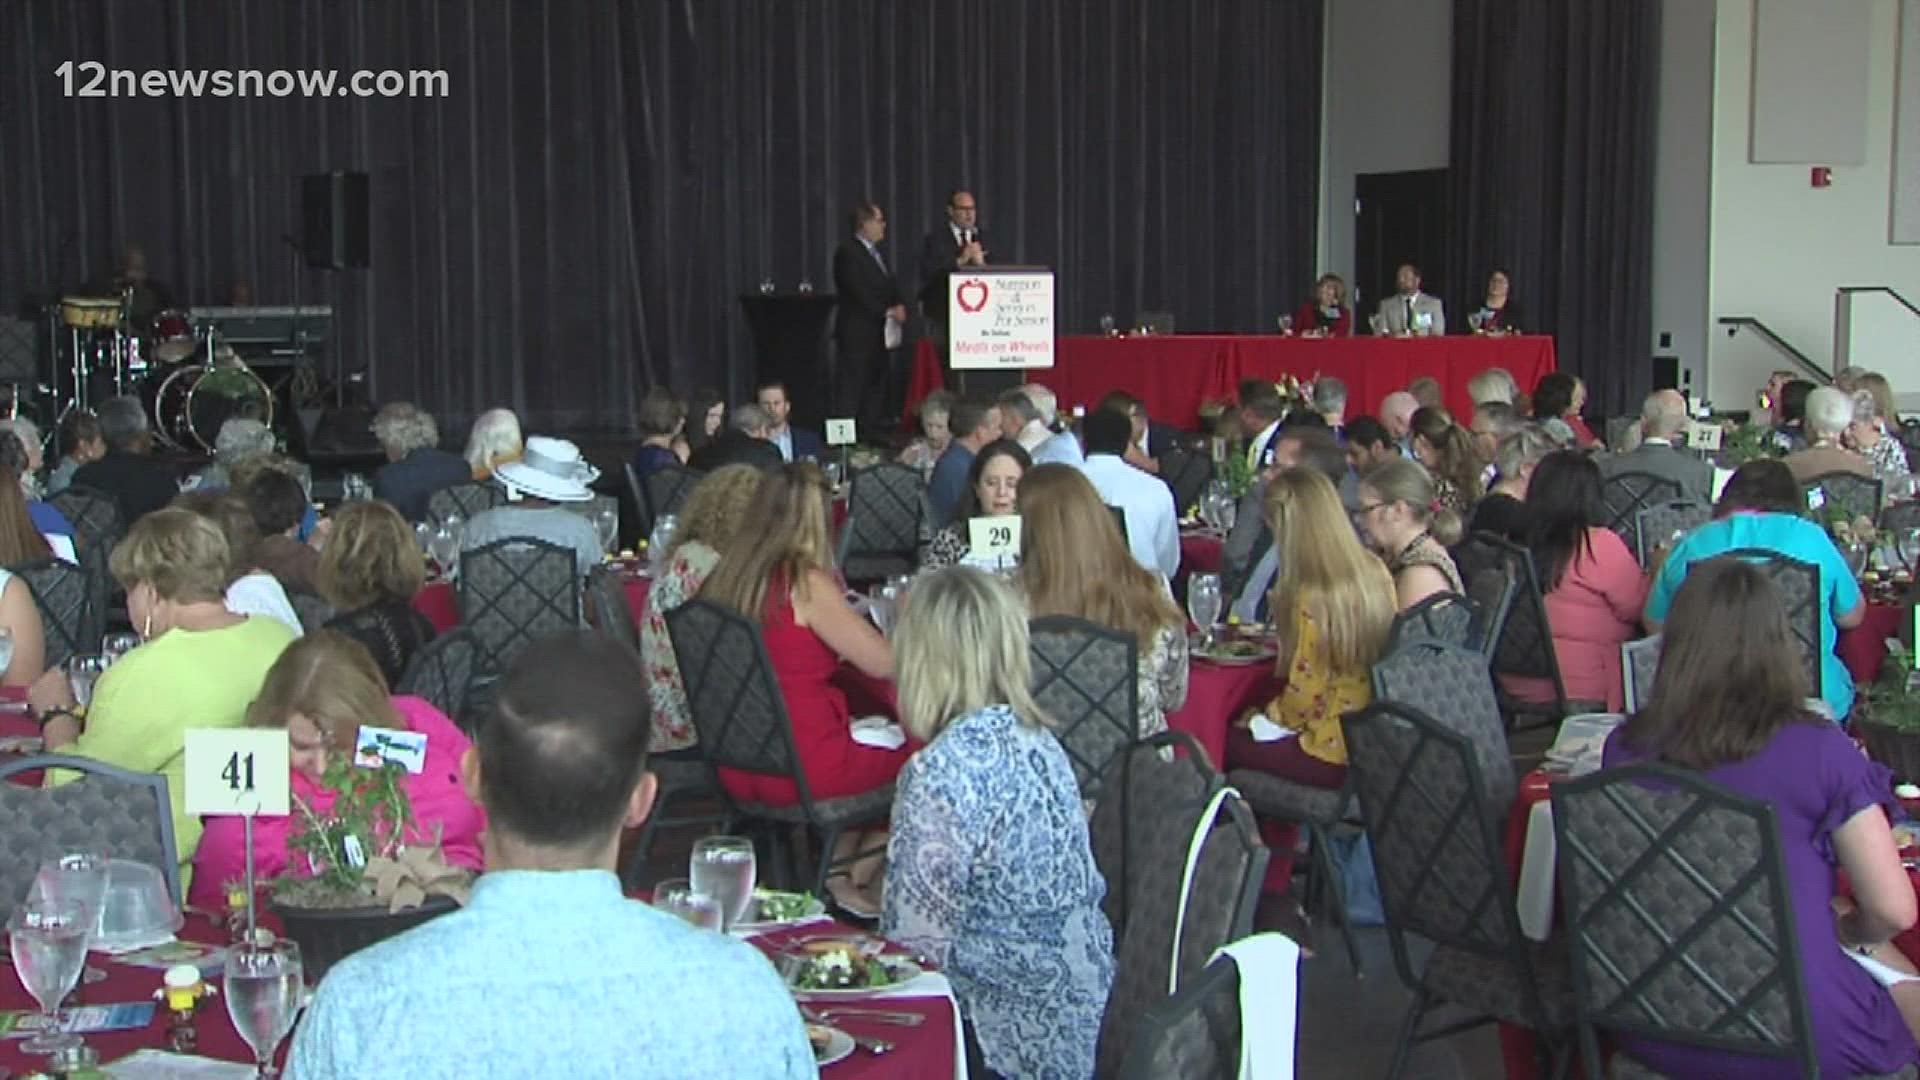 Hundreds of Southeast Texans packed the Event Centre Thursday for the 11th annual Deliver the Difference luncheon supporting Meals on Wheels.